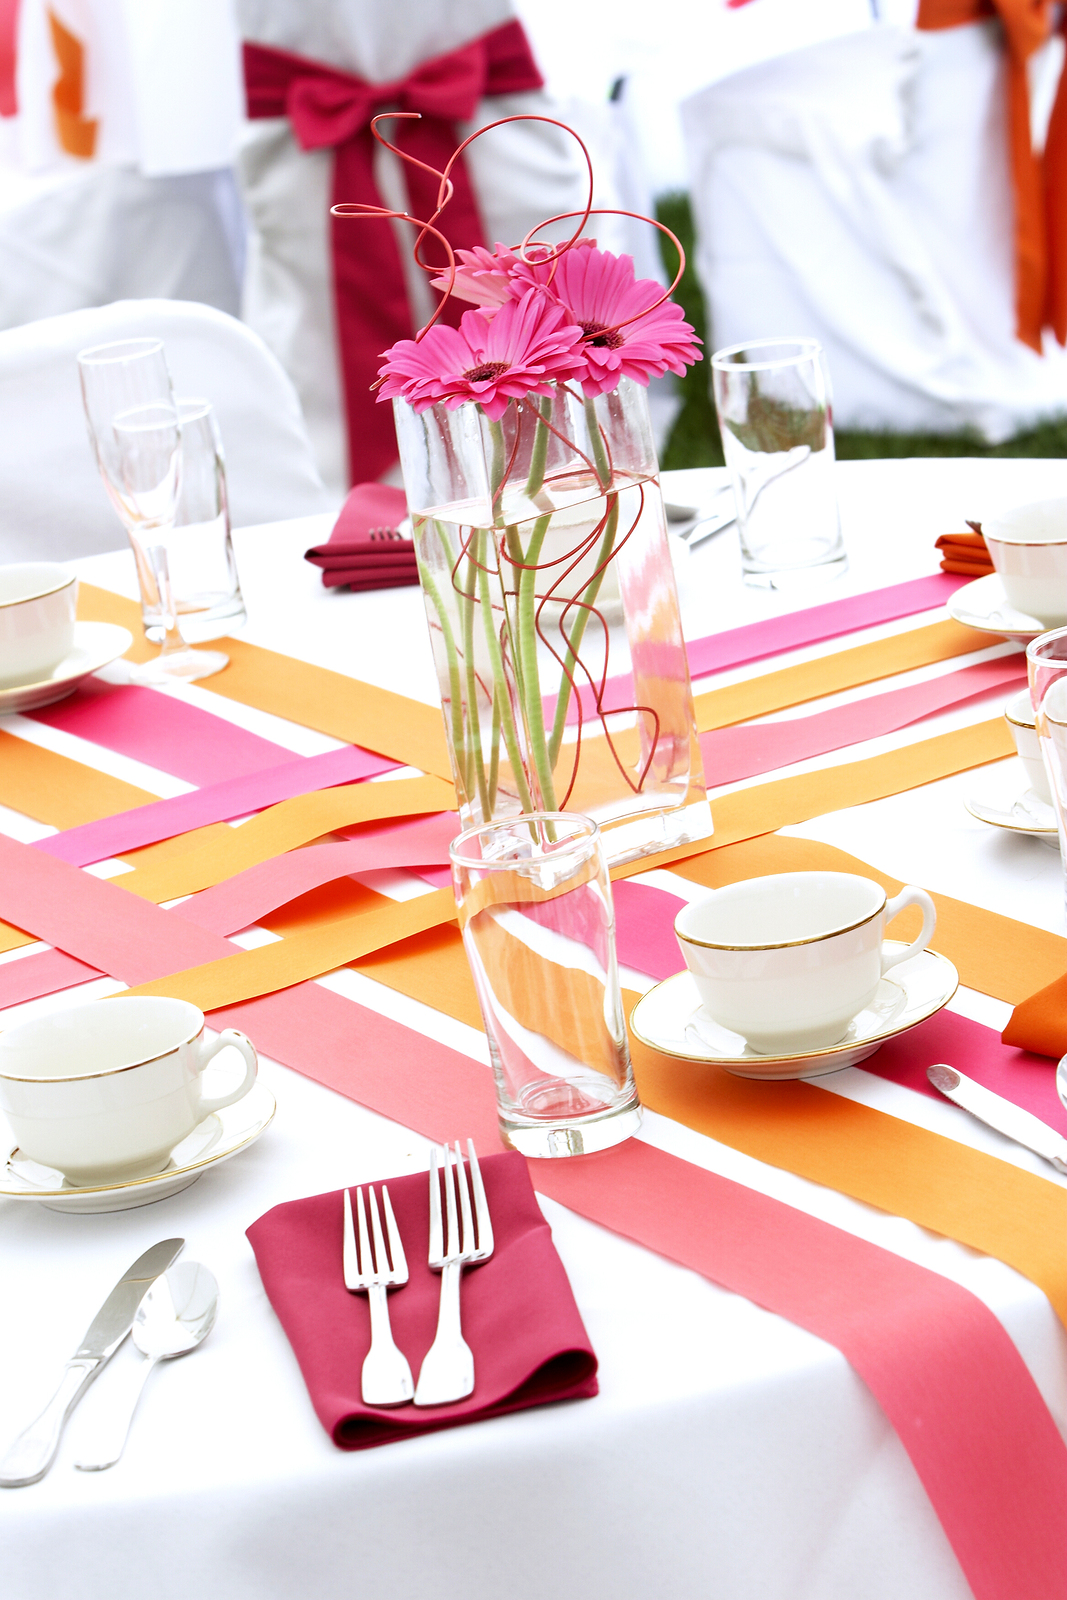 very cool and hip wedding table settings for a funky fresh young bride and groom. this is not your mama's wedding! one of several in this series.